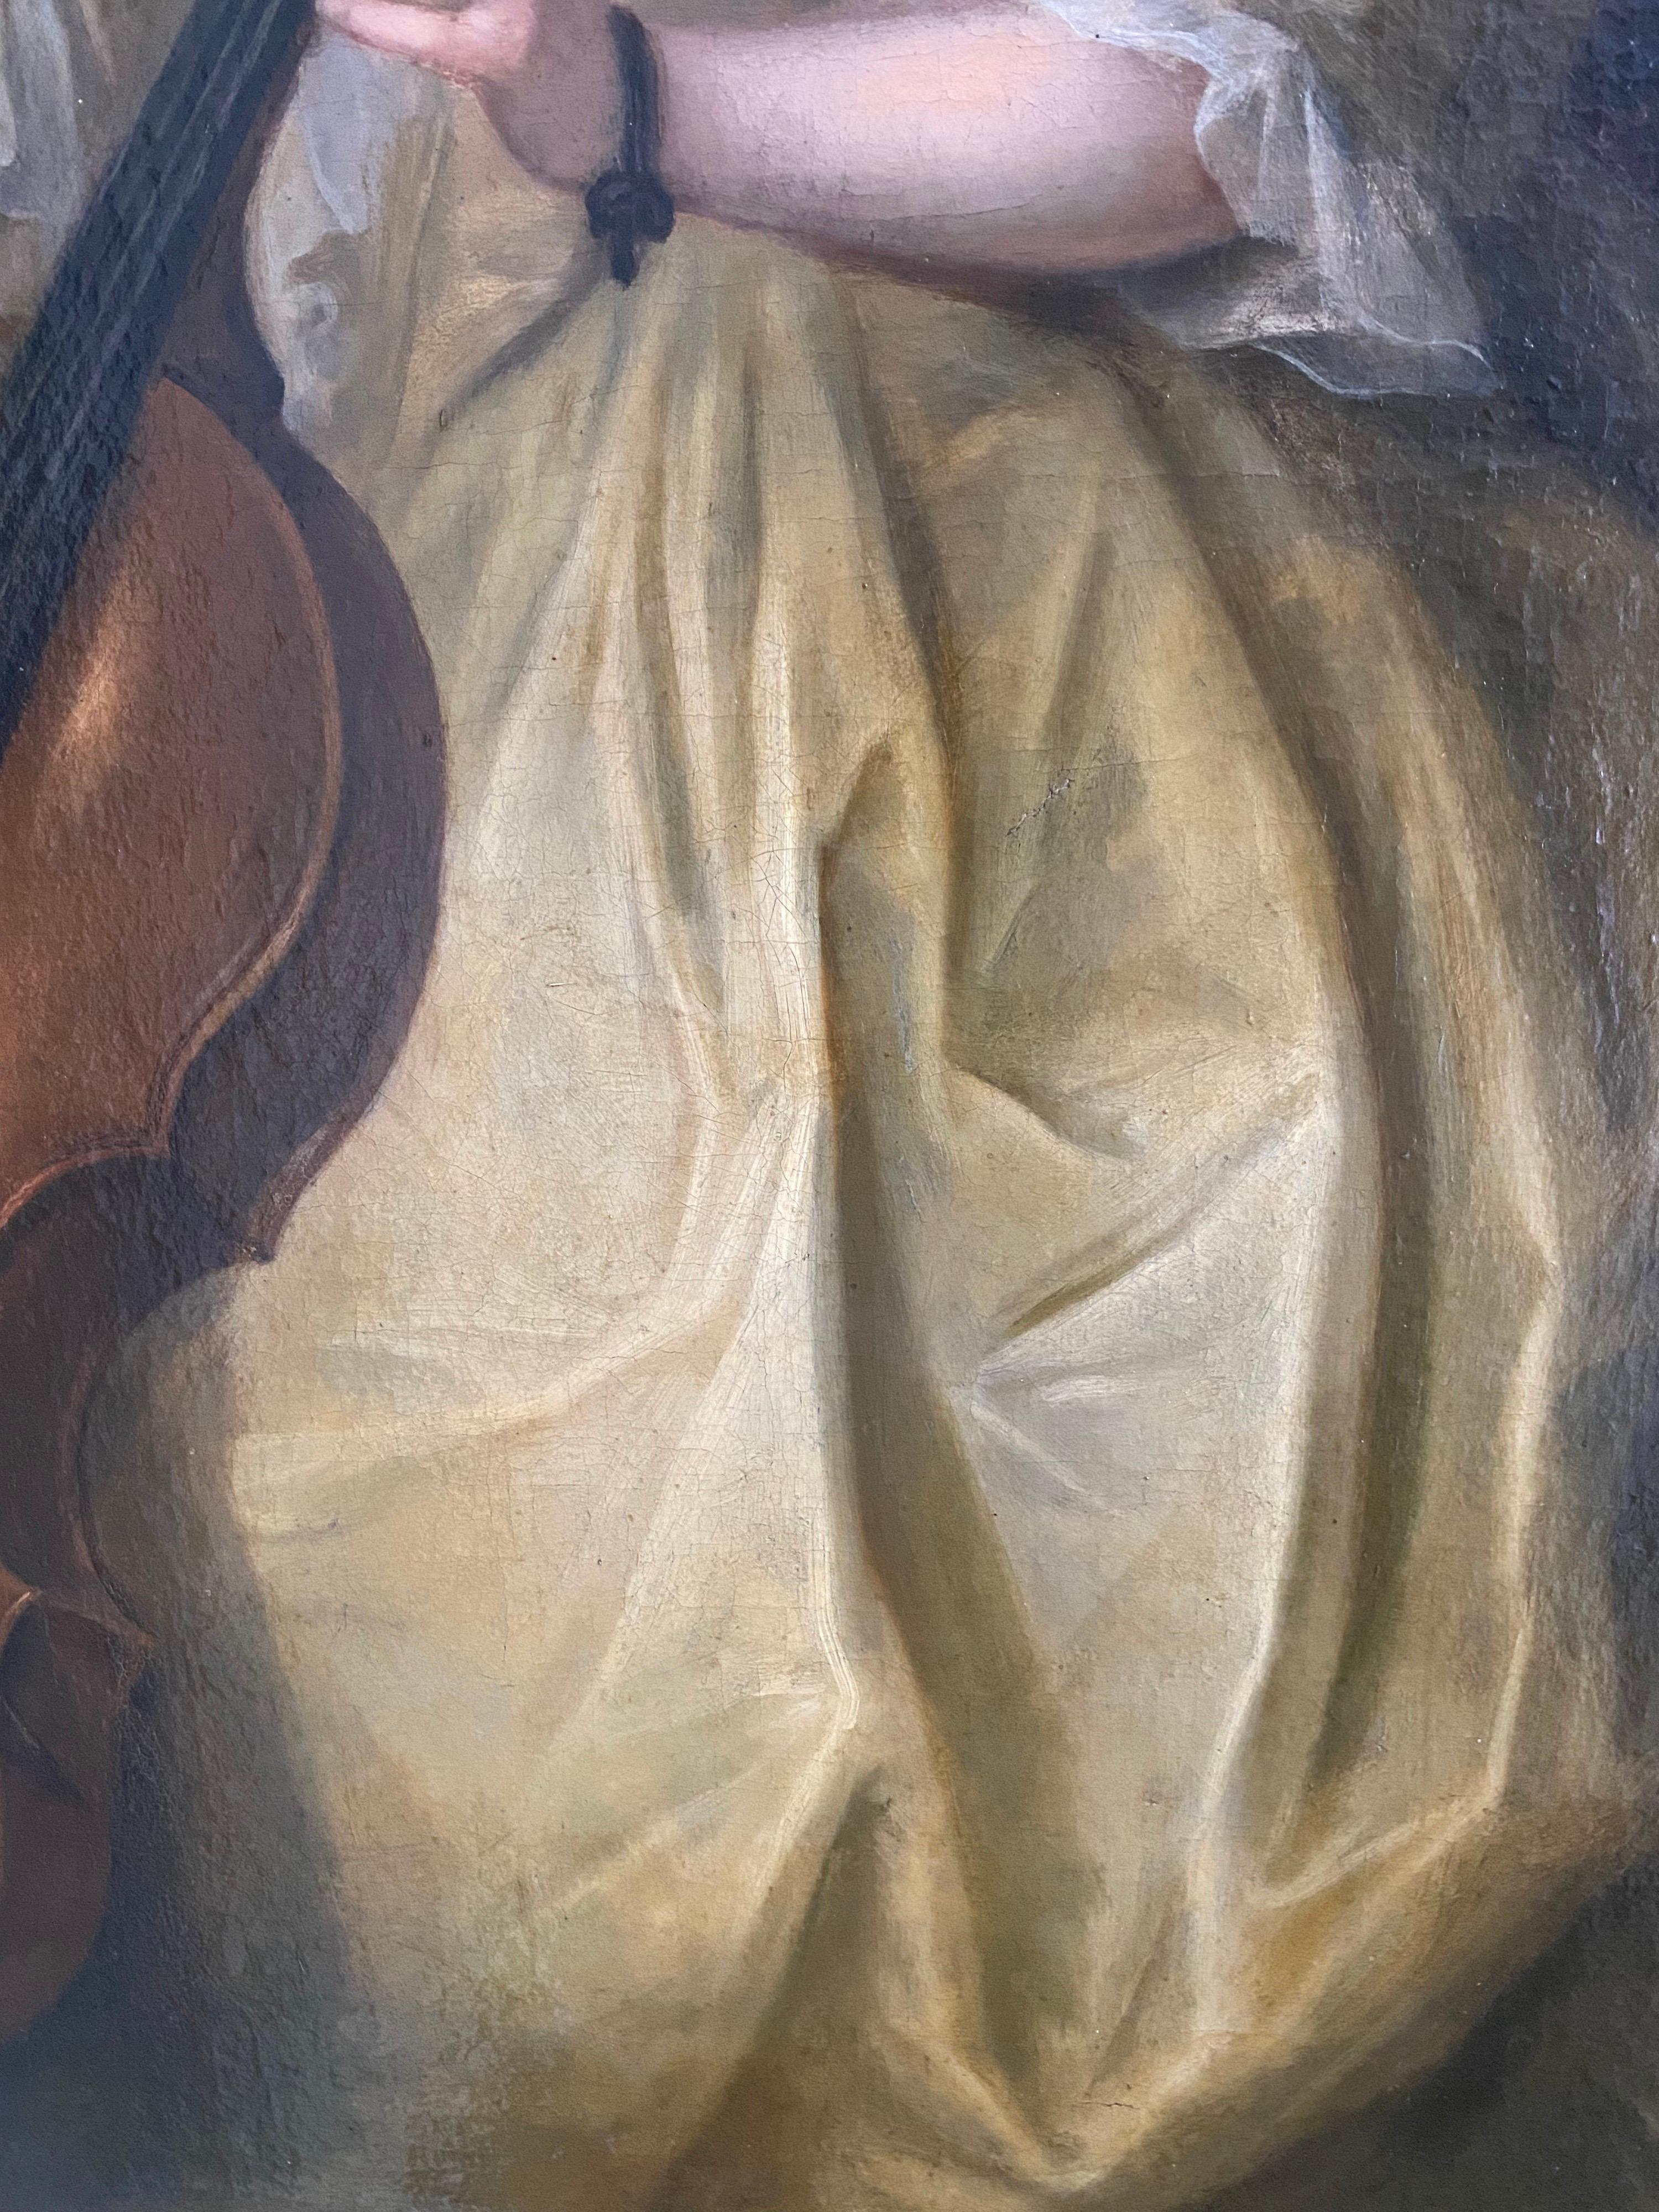 18th century portrait of the artist’s daughter, Catharina, playing the cello - Old Masters Painting by Balthasar Denner 